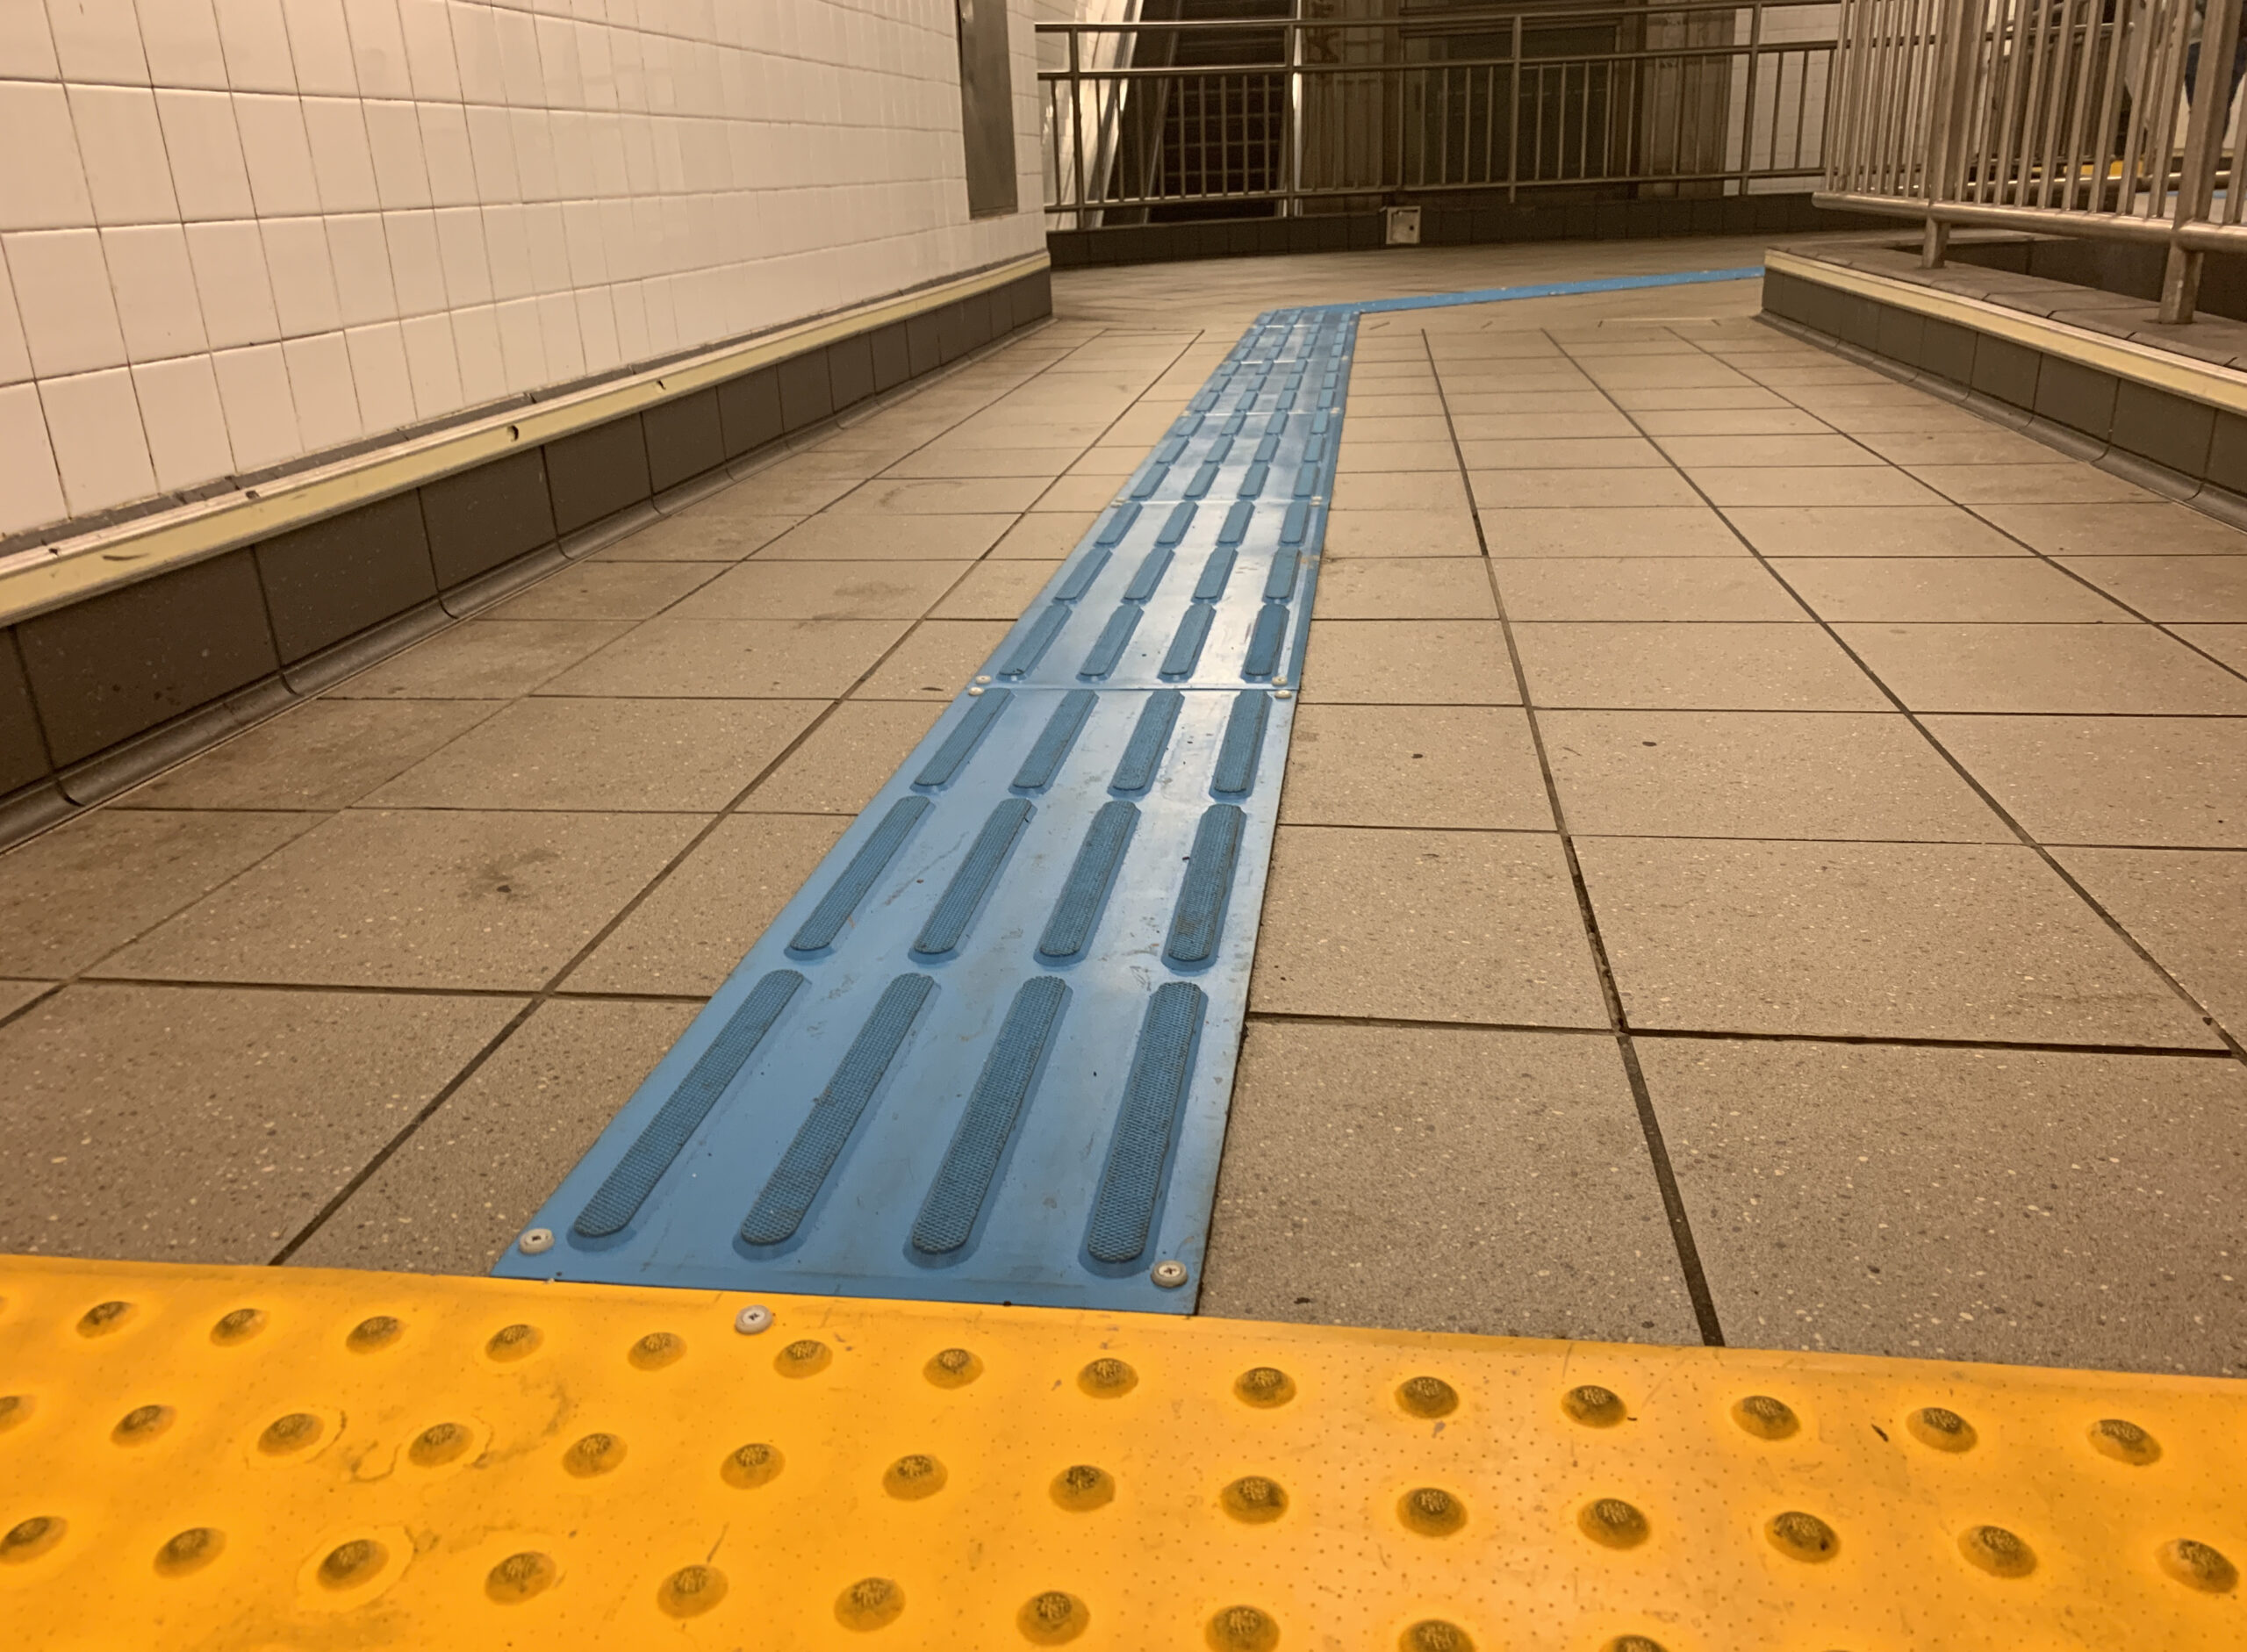 The blue tactile guideway leads those with low vision to their subway platform. Photo: Meaghan McGoldrick/Brooklyn Eagle